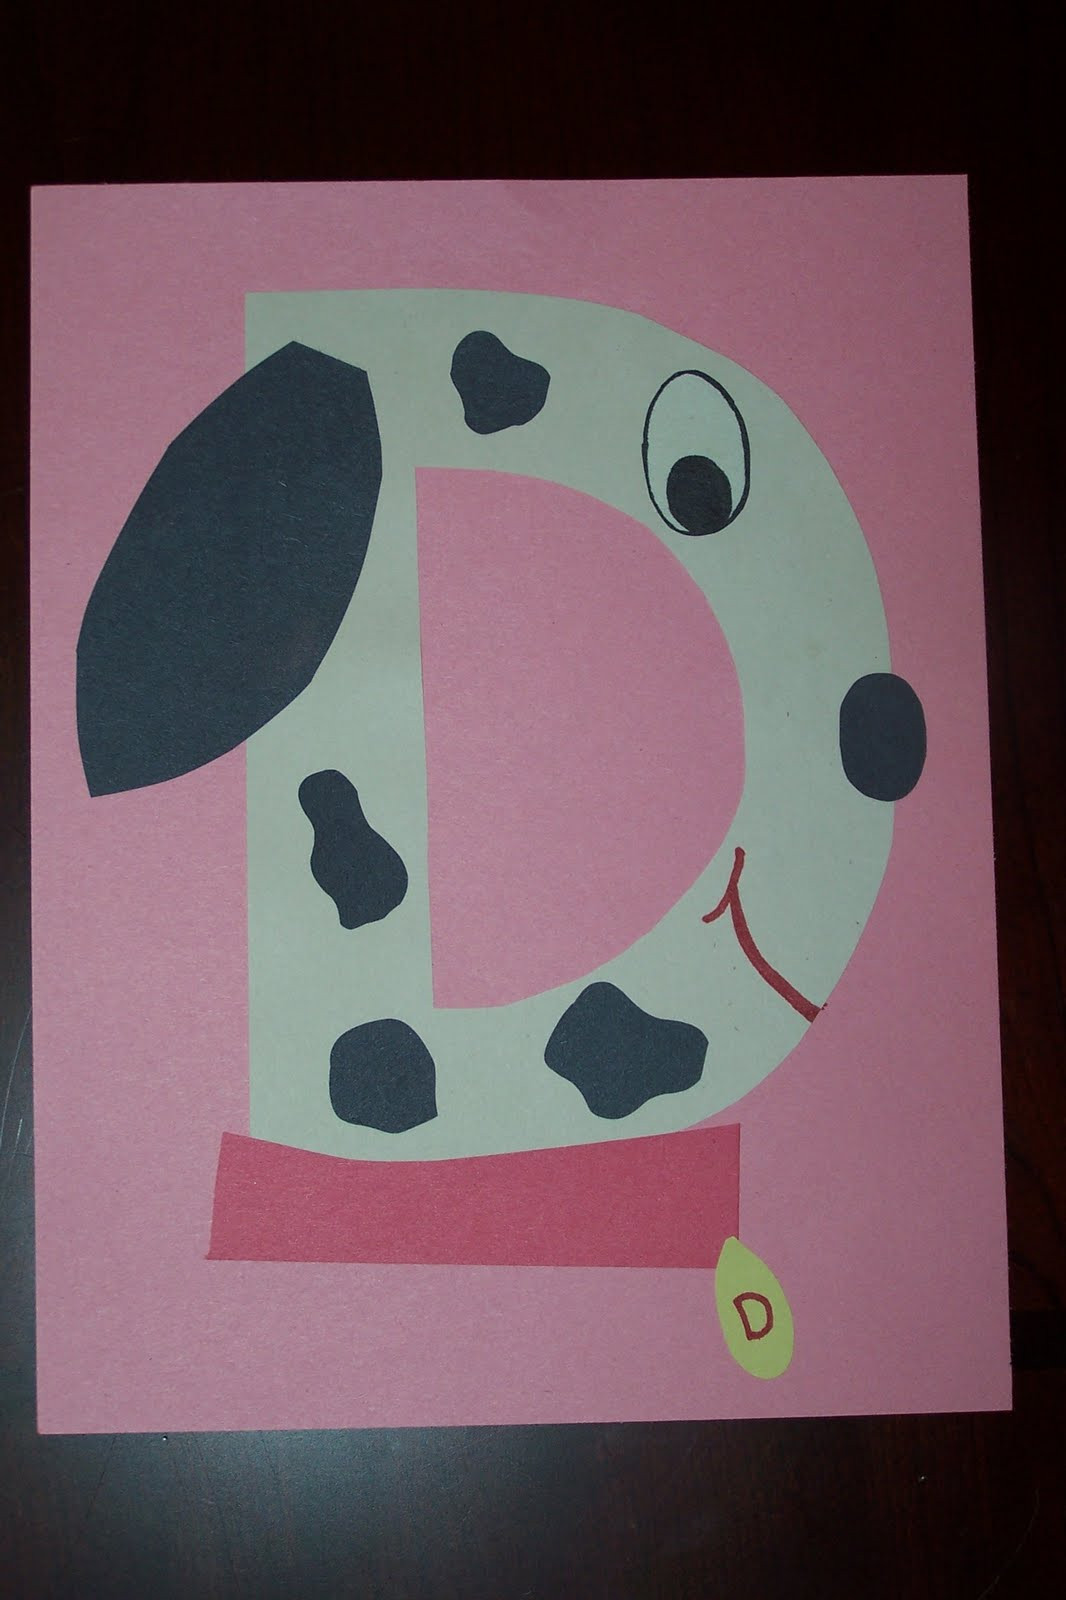 D Crafts For Preschoolers
 The Princess and the Tot Letter Crafts Uppercase